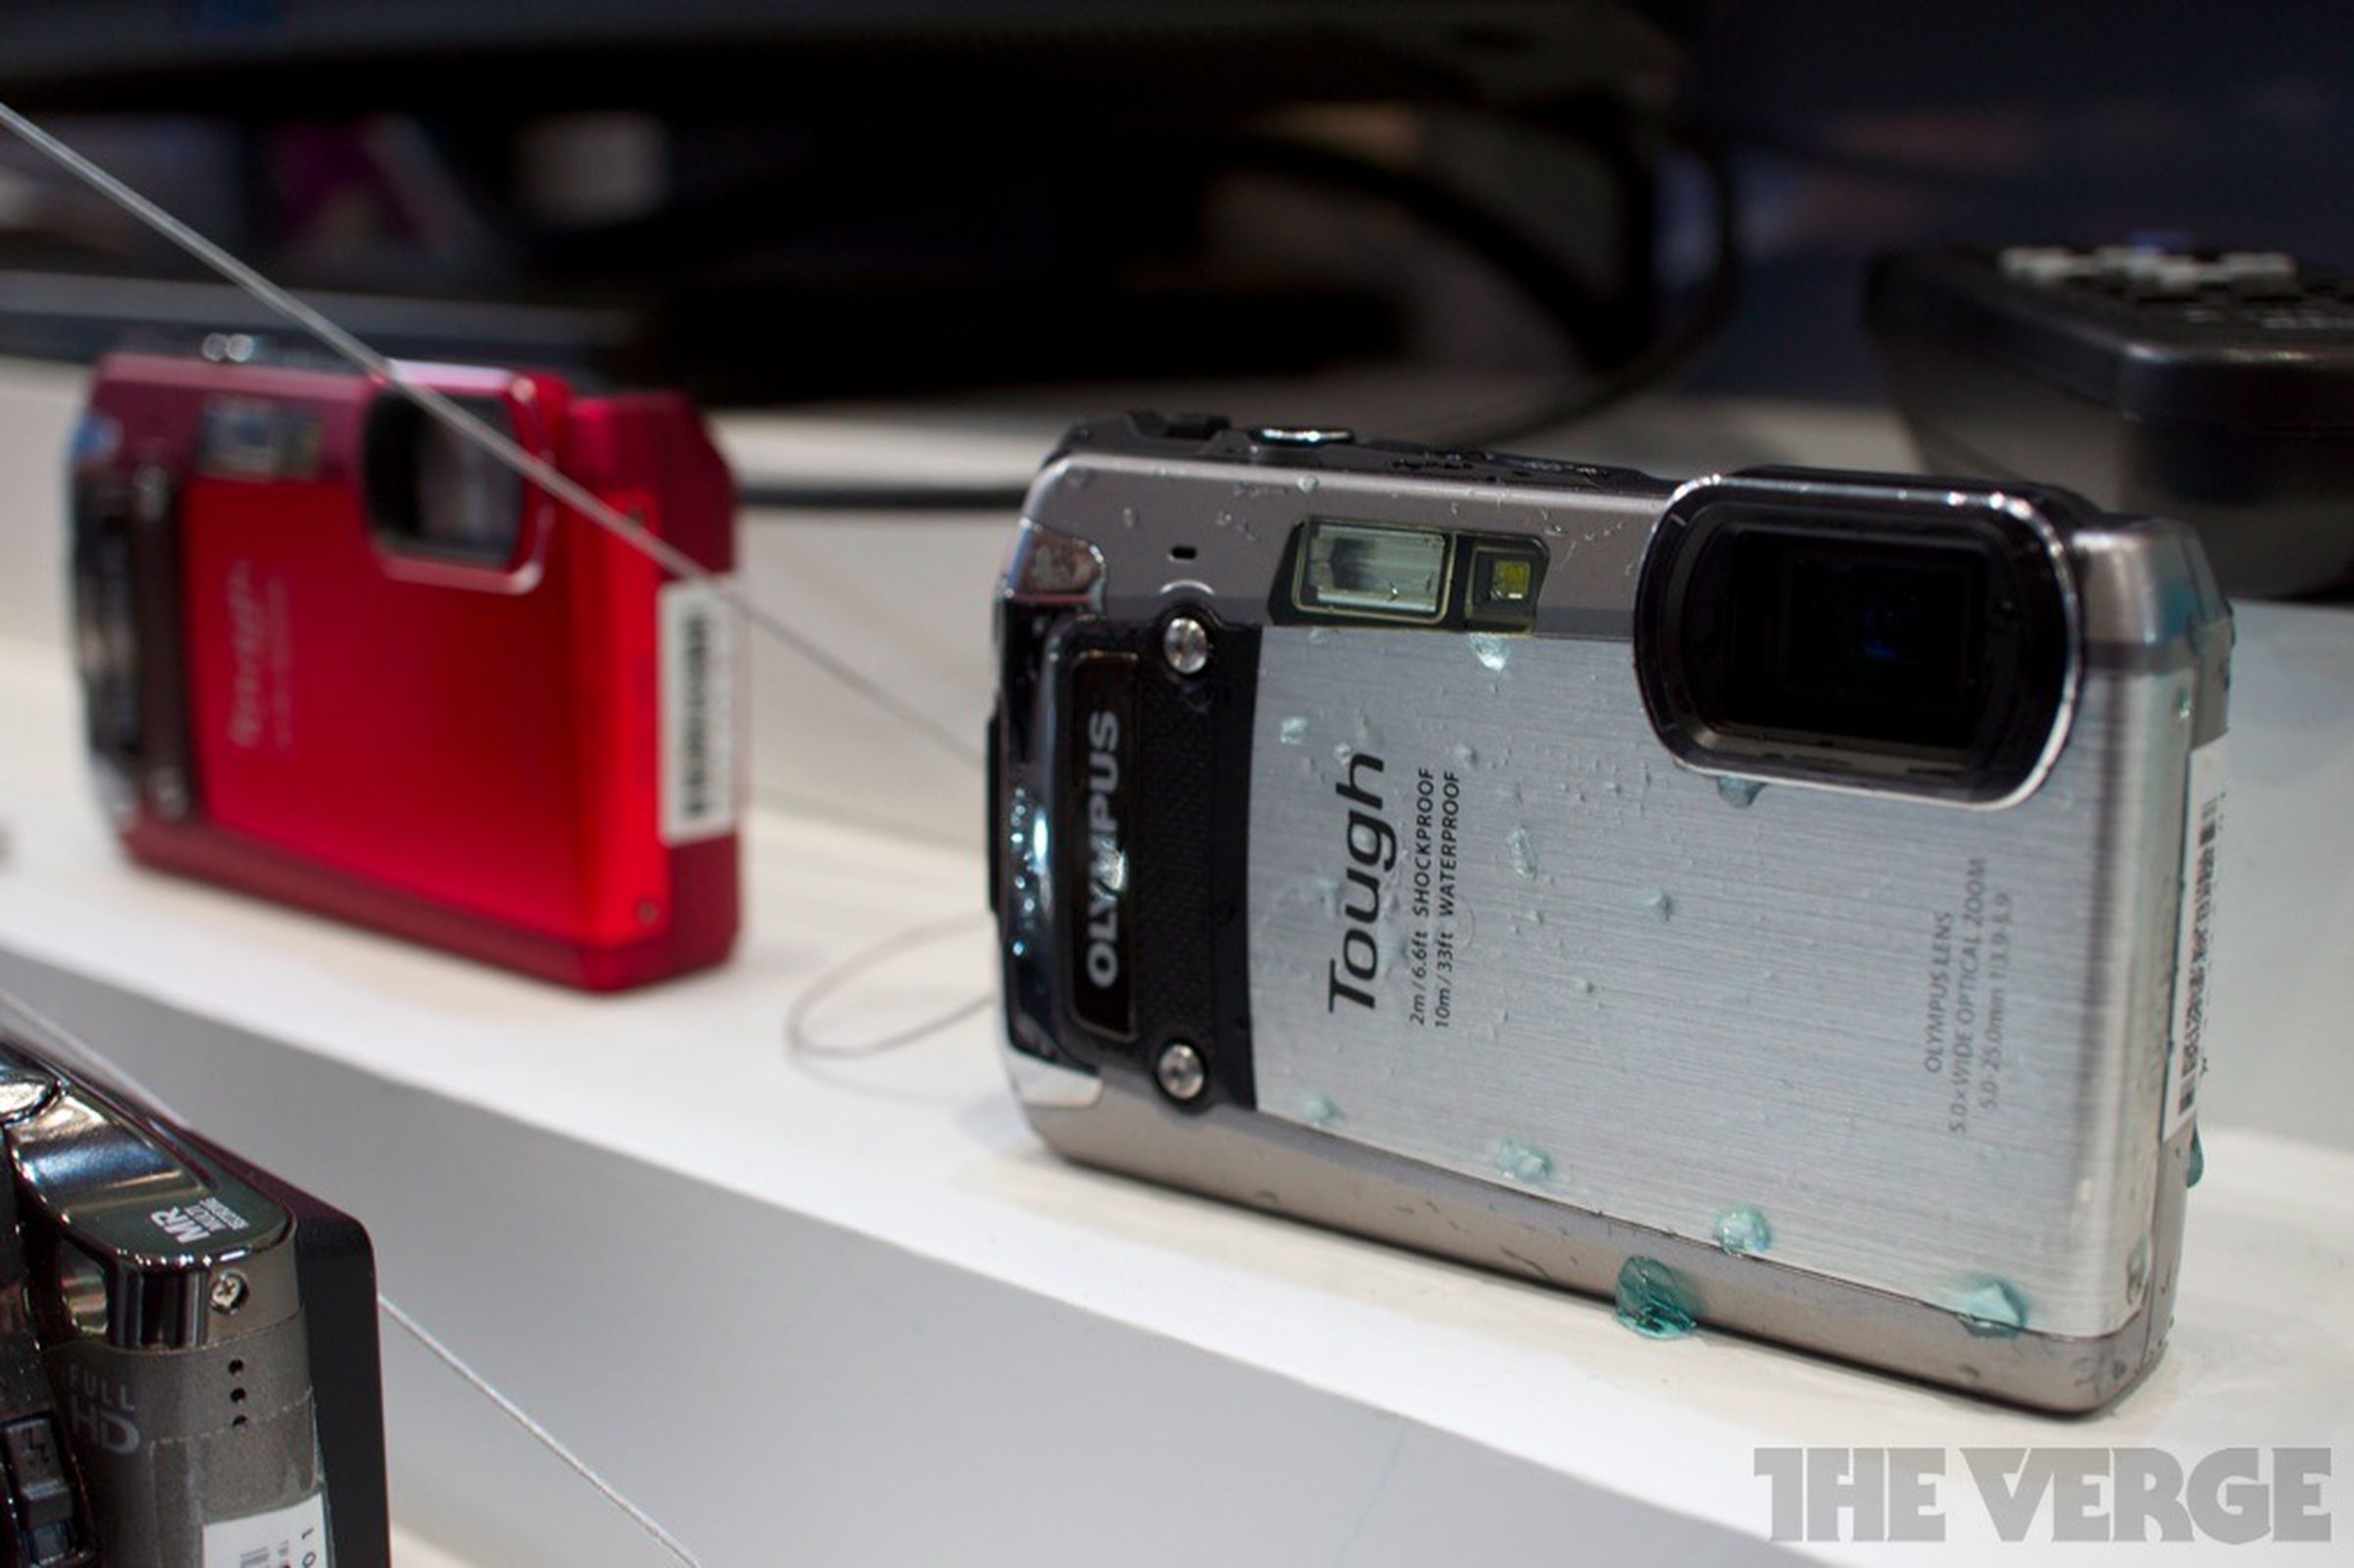 Olympus TG-820 iHS hands-on pictures